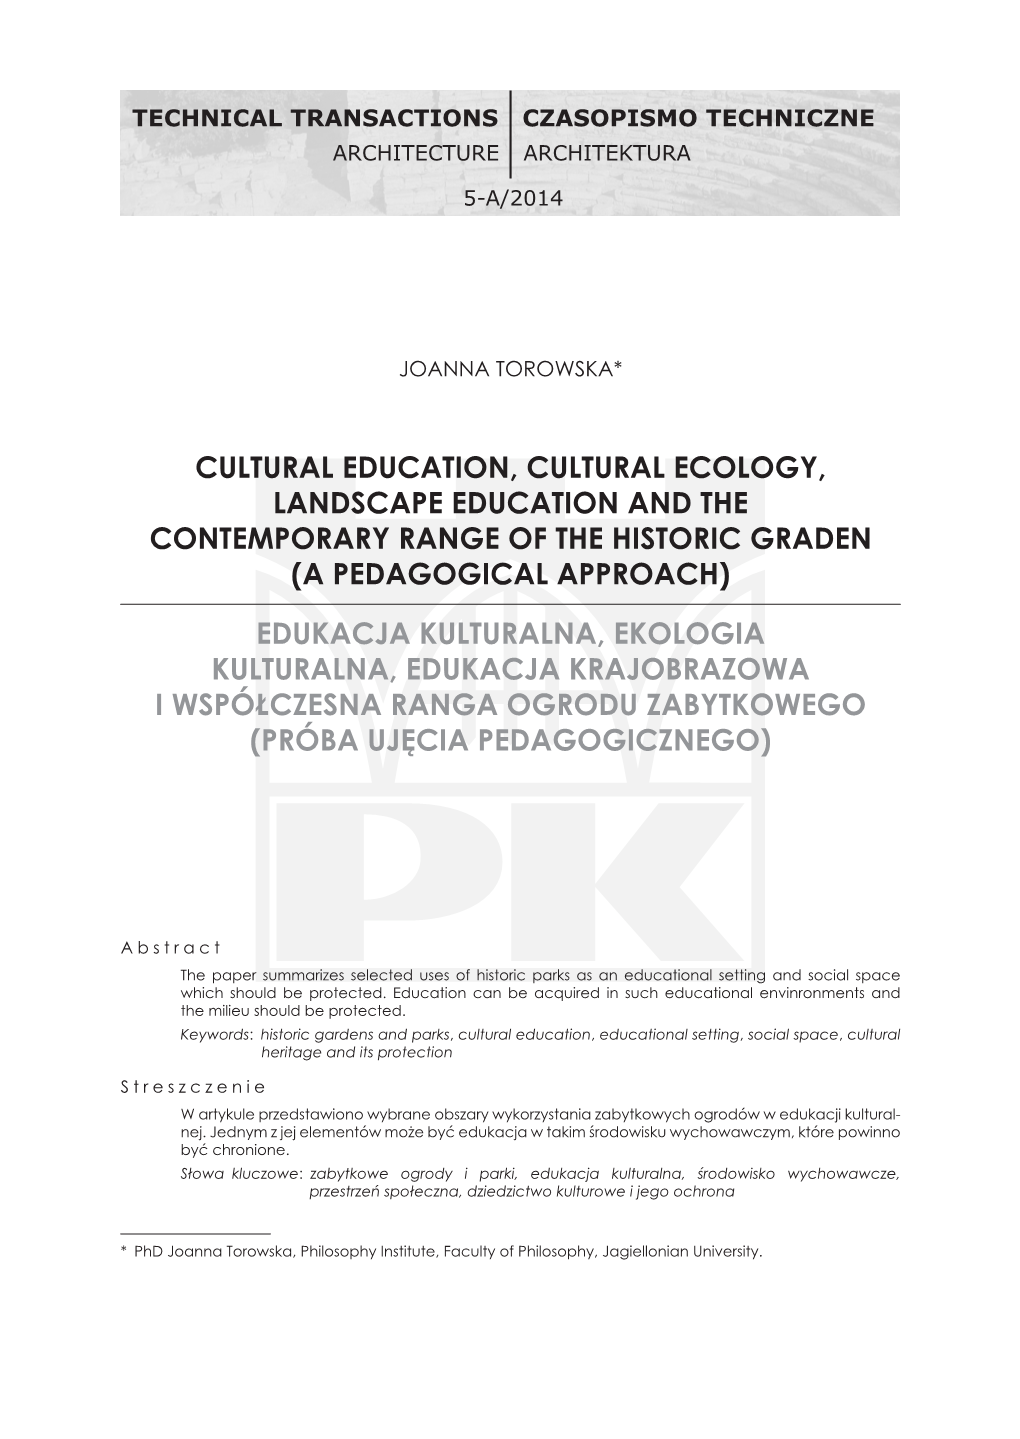 Cultural Education, Cultural Ecology, Landscape Education and the Contemporary Range of the Historic Graden (A Pedagogical Approach)